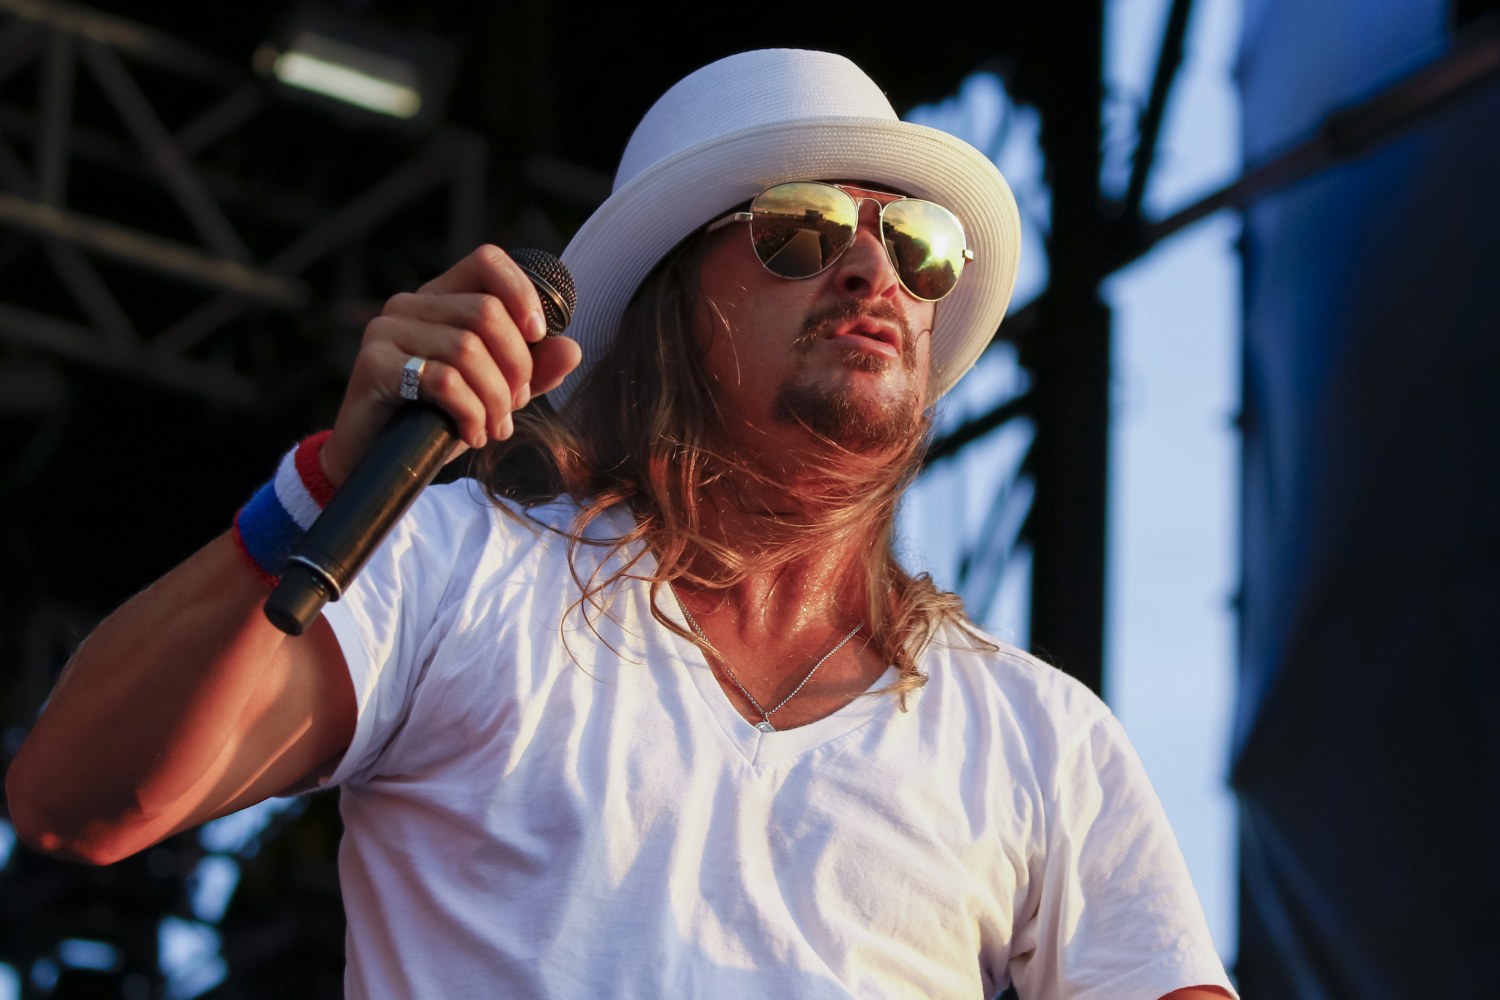 Kid Rock says he won't perform at venues that require vaccines or